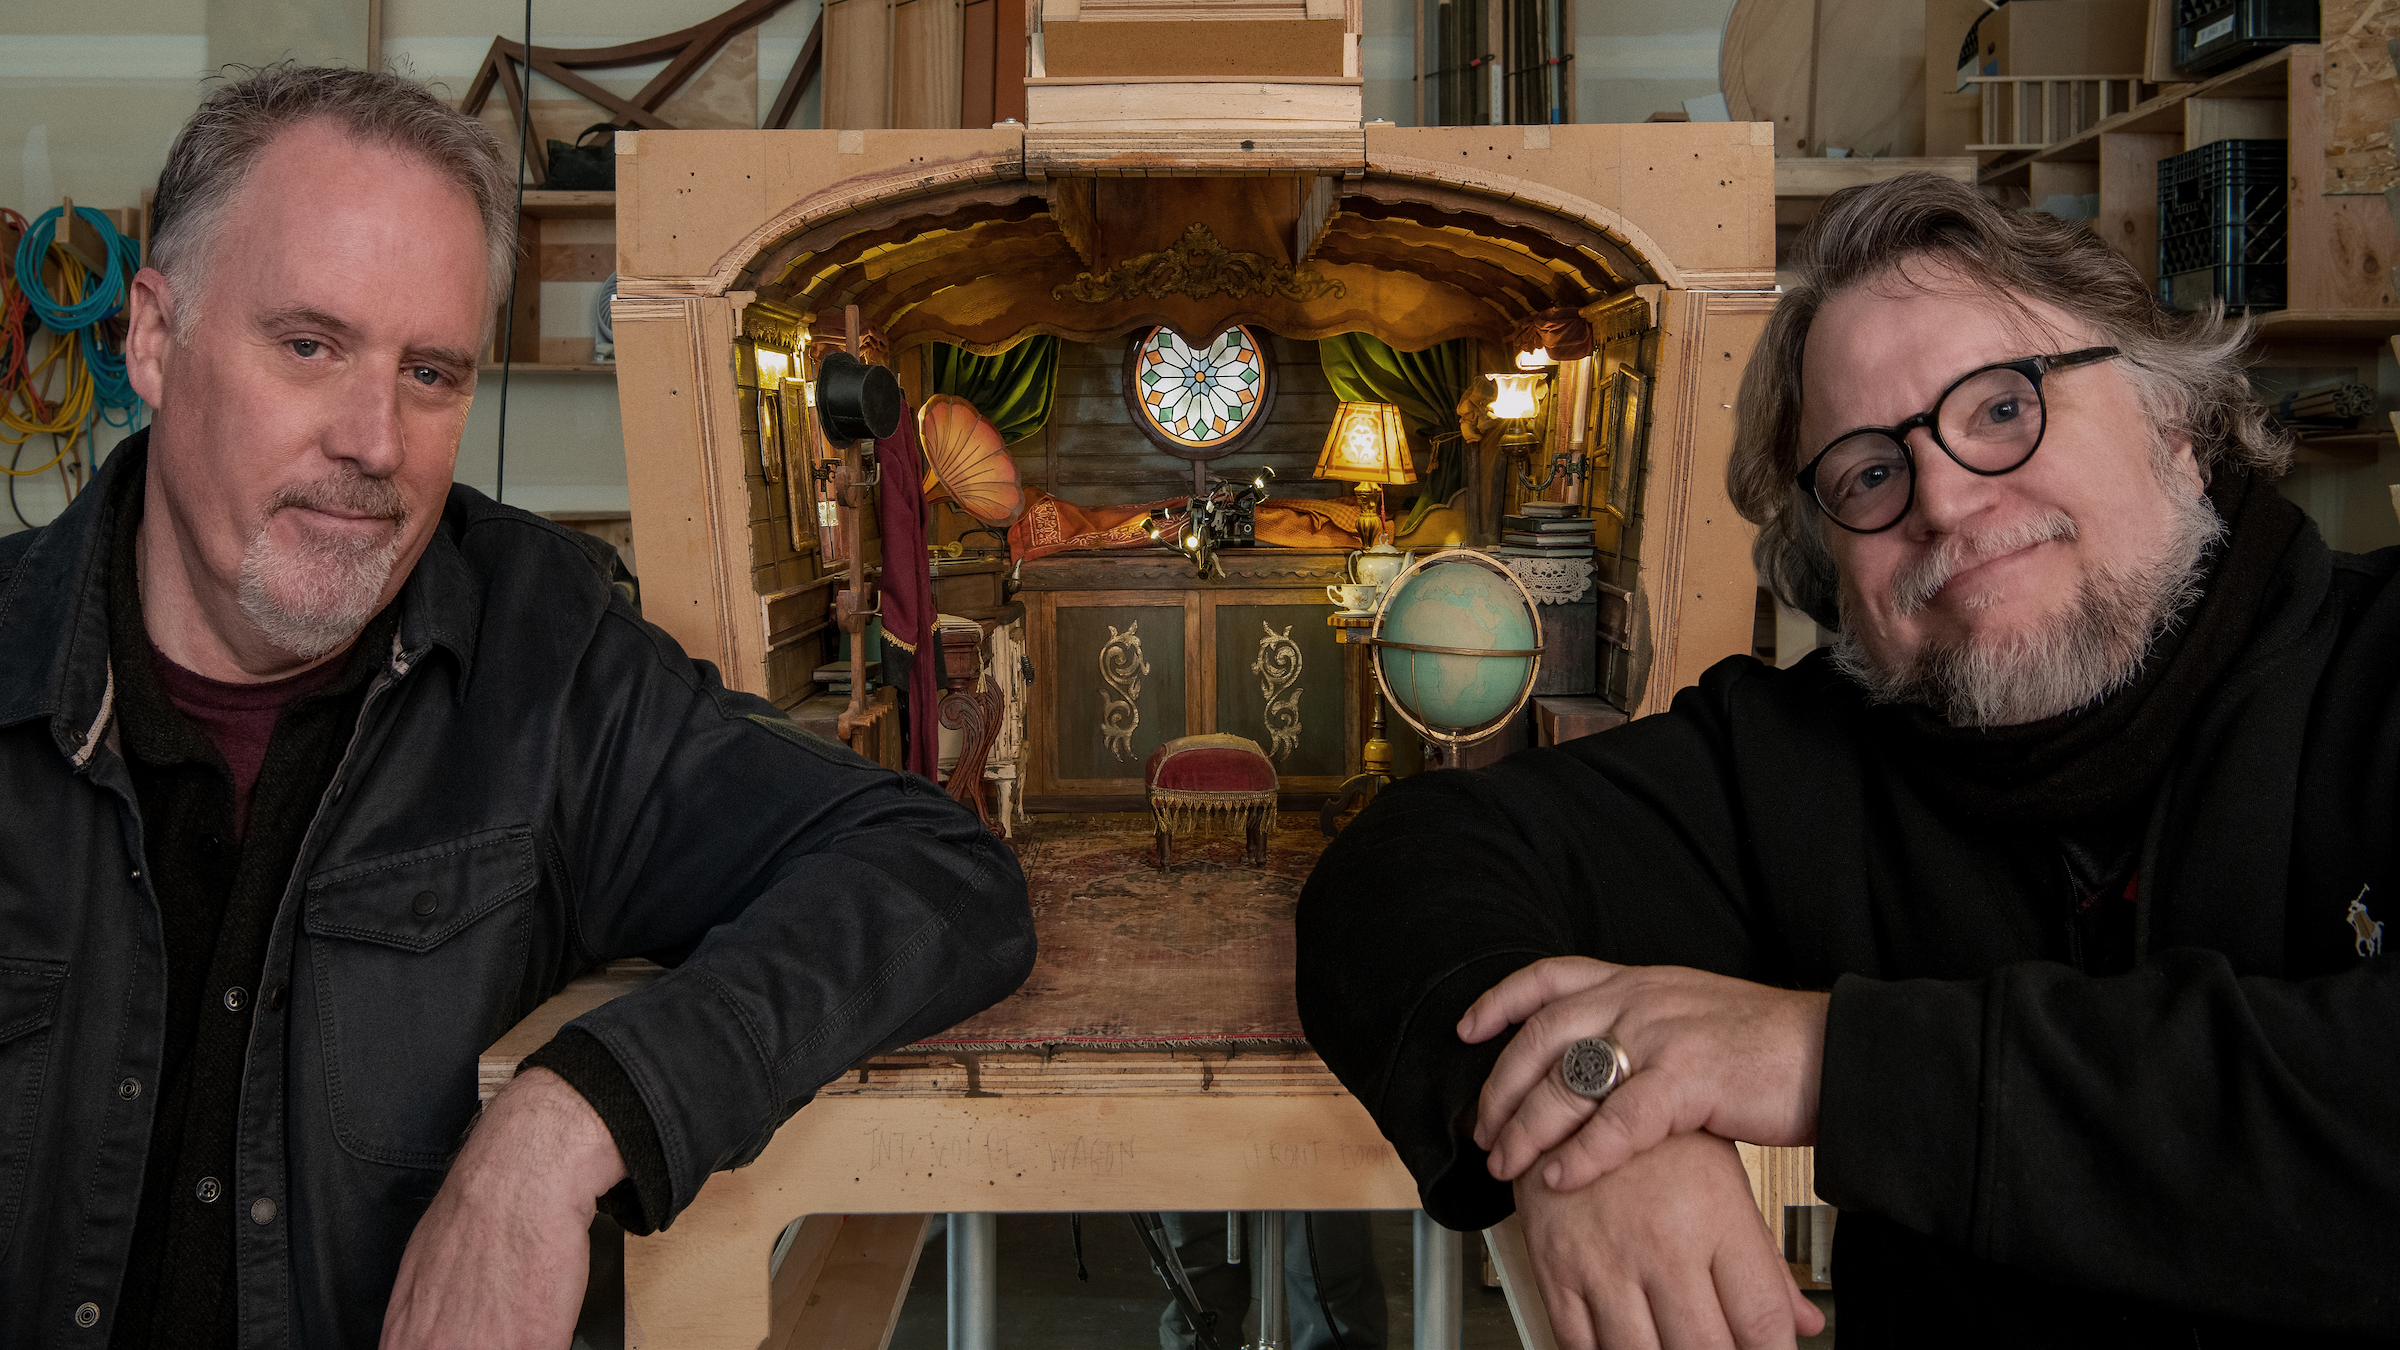 Guillermo del Toro's Pinocchio: How Does Stop-Motion Work